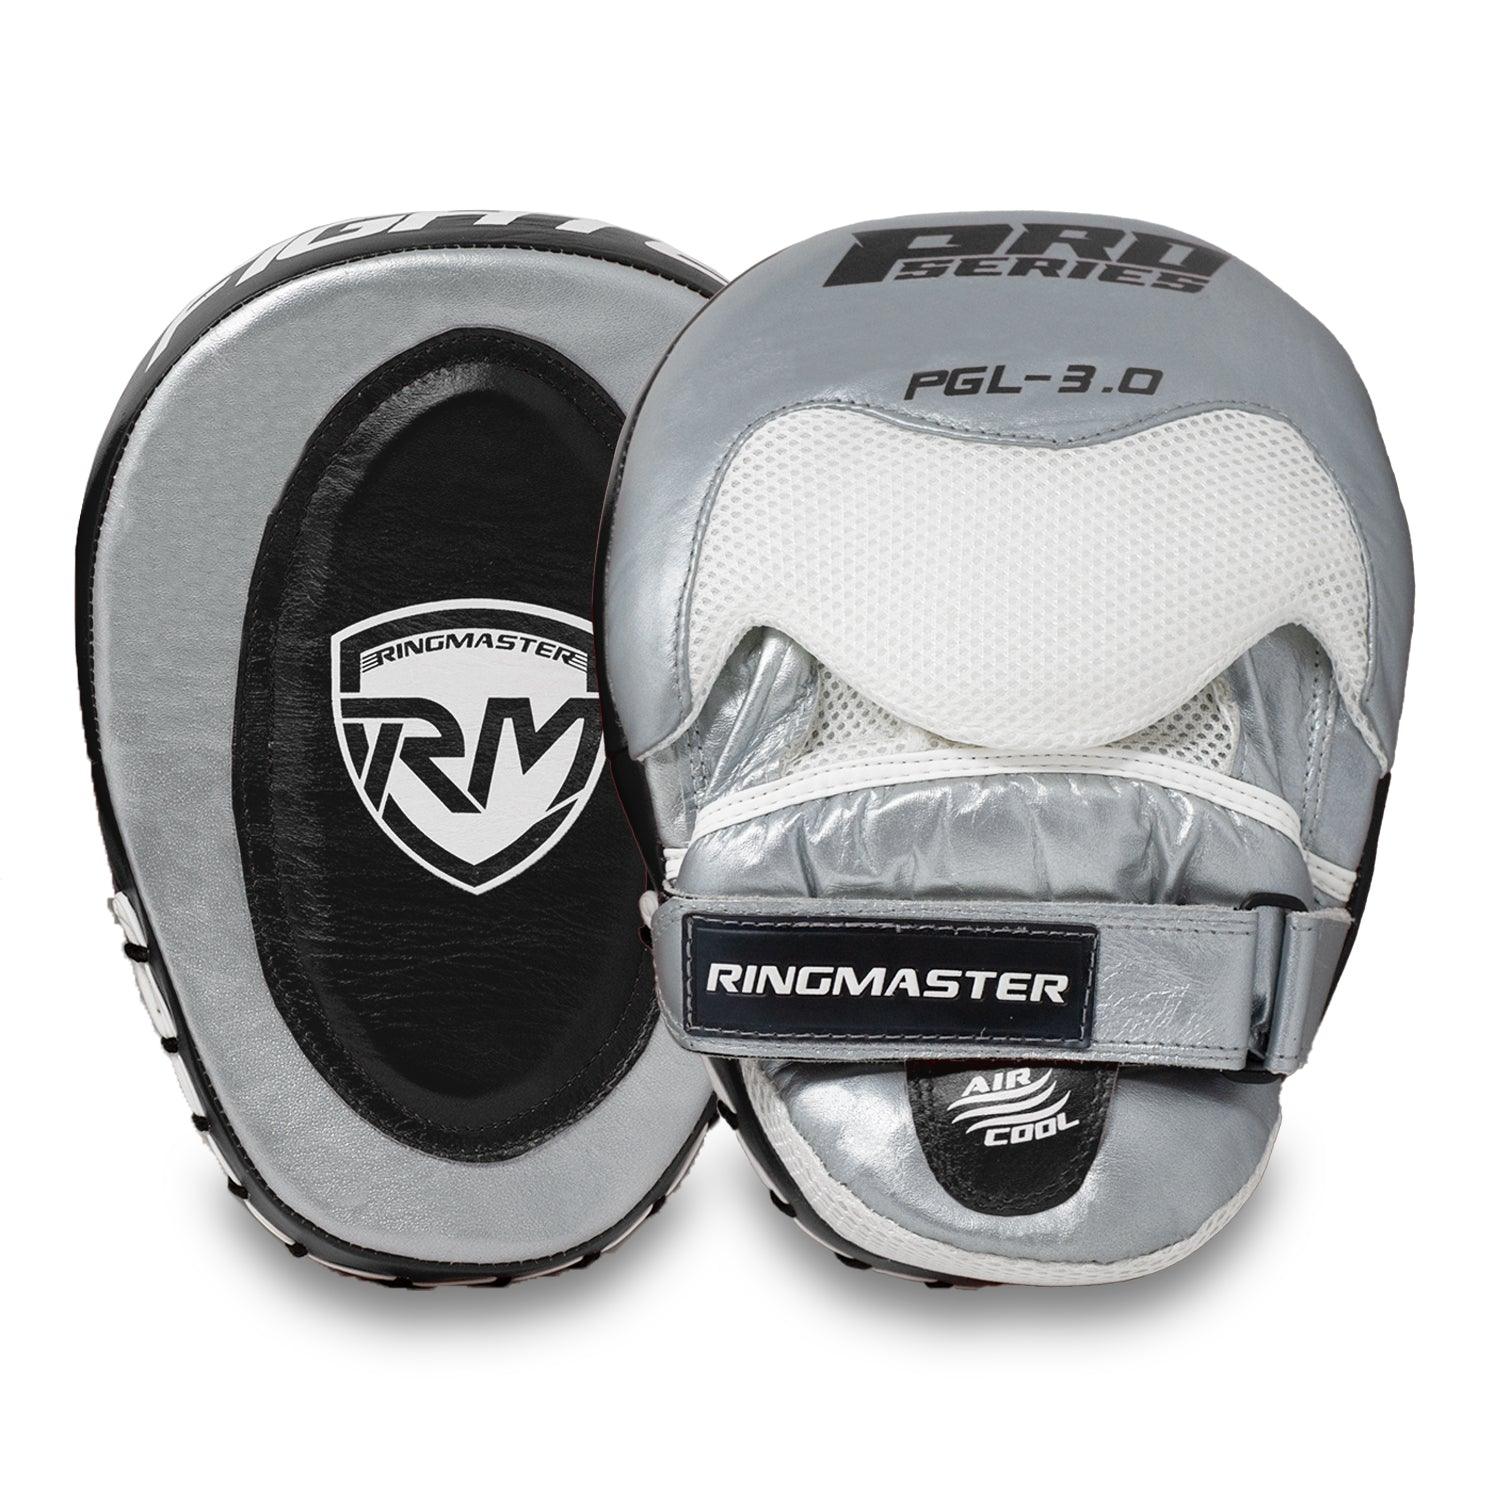 RingMaster Sports Focus pads Genuine Leather PGL 3.0 Black and White image 2